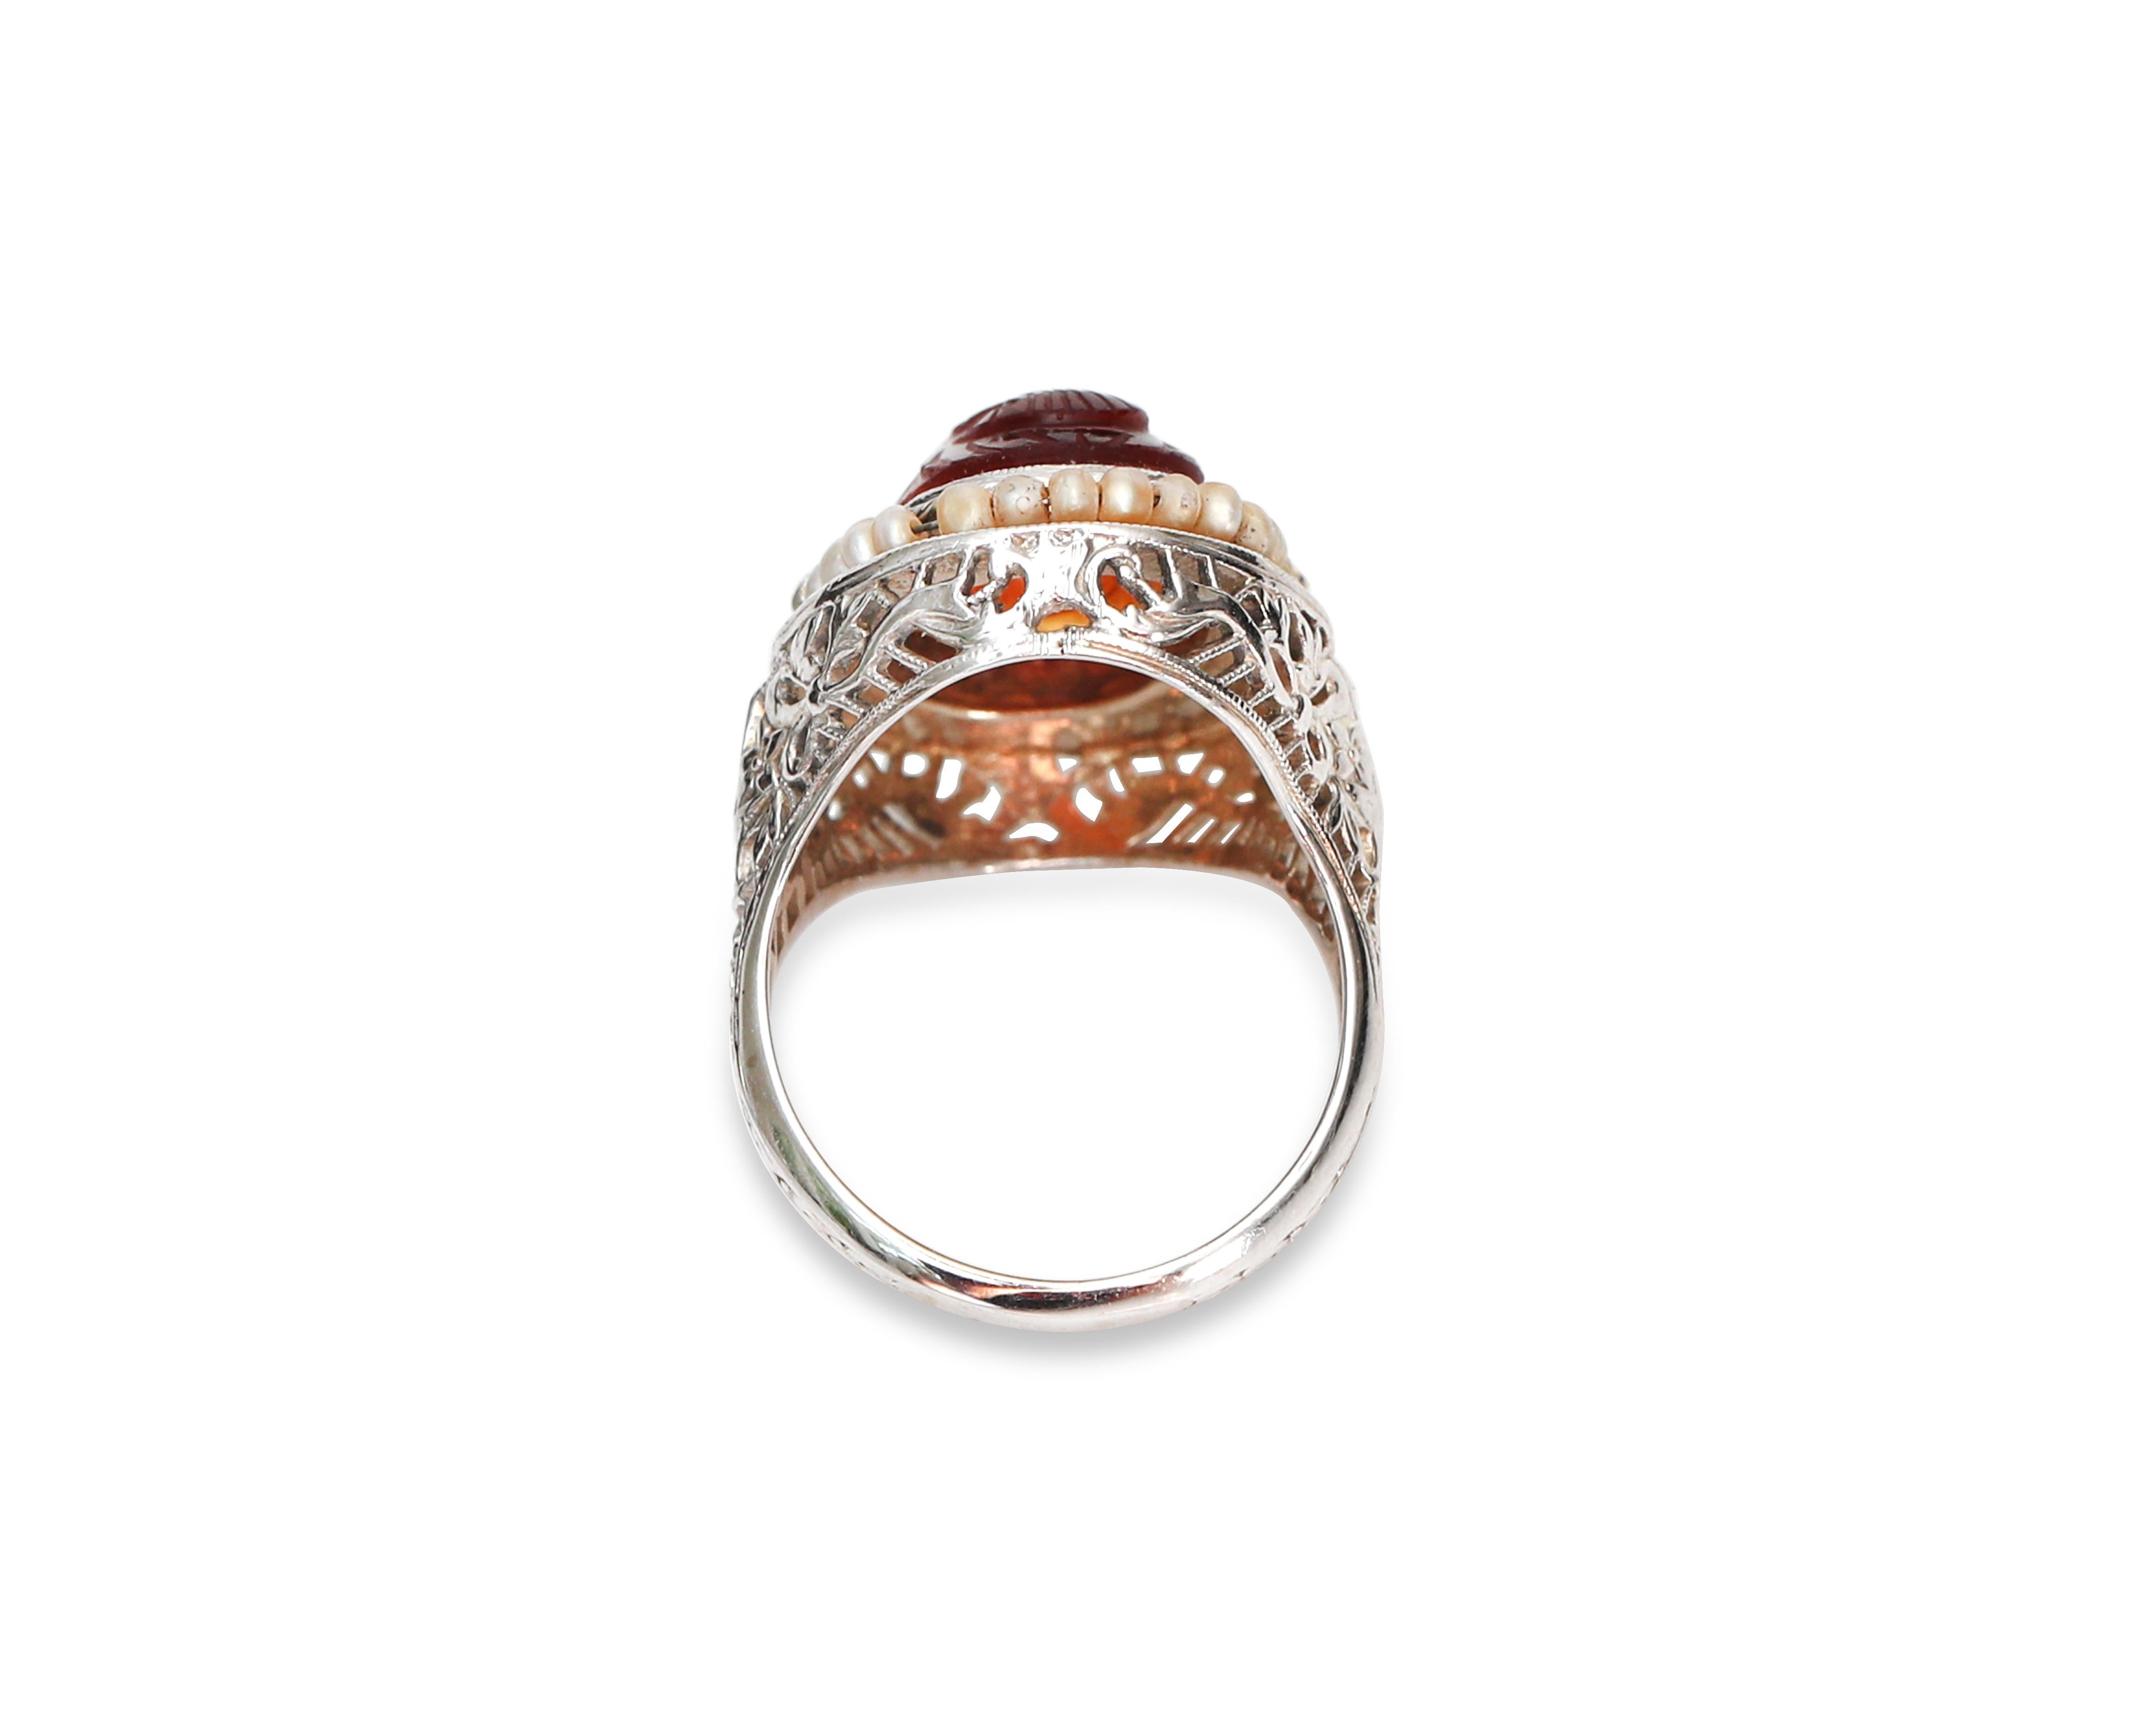 Women's Victorian 14K White Gold Filigree Ring, Scarab Carved Carnelian Seed Pearl Halo